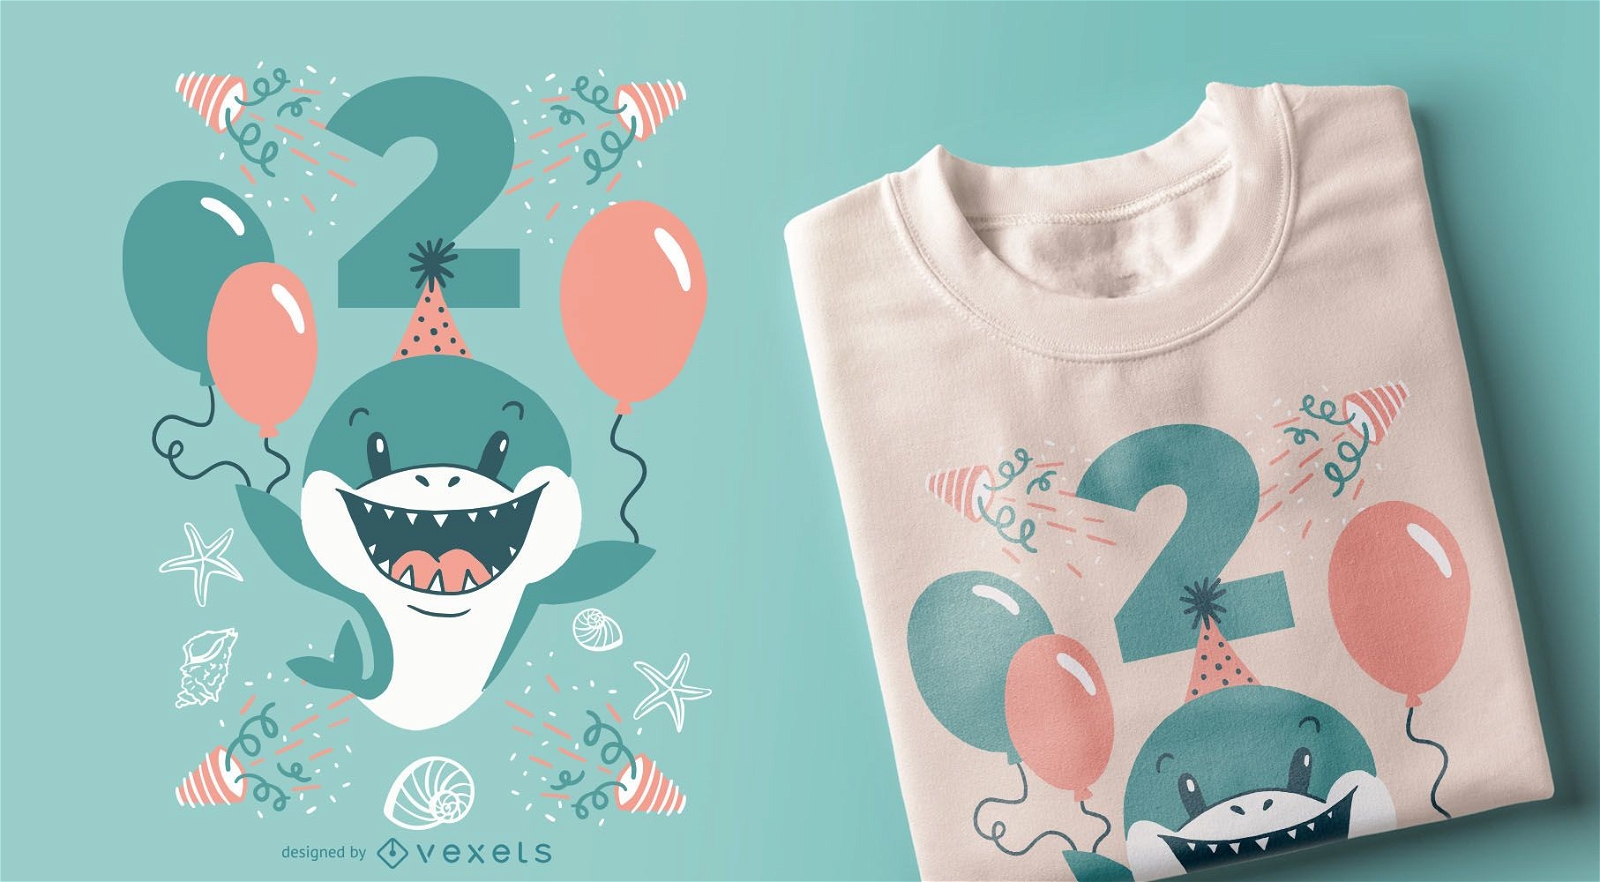 Two Year-Old Shark T-shirt Design